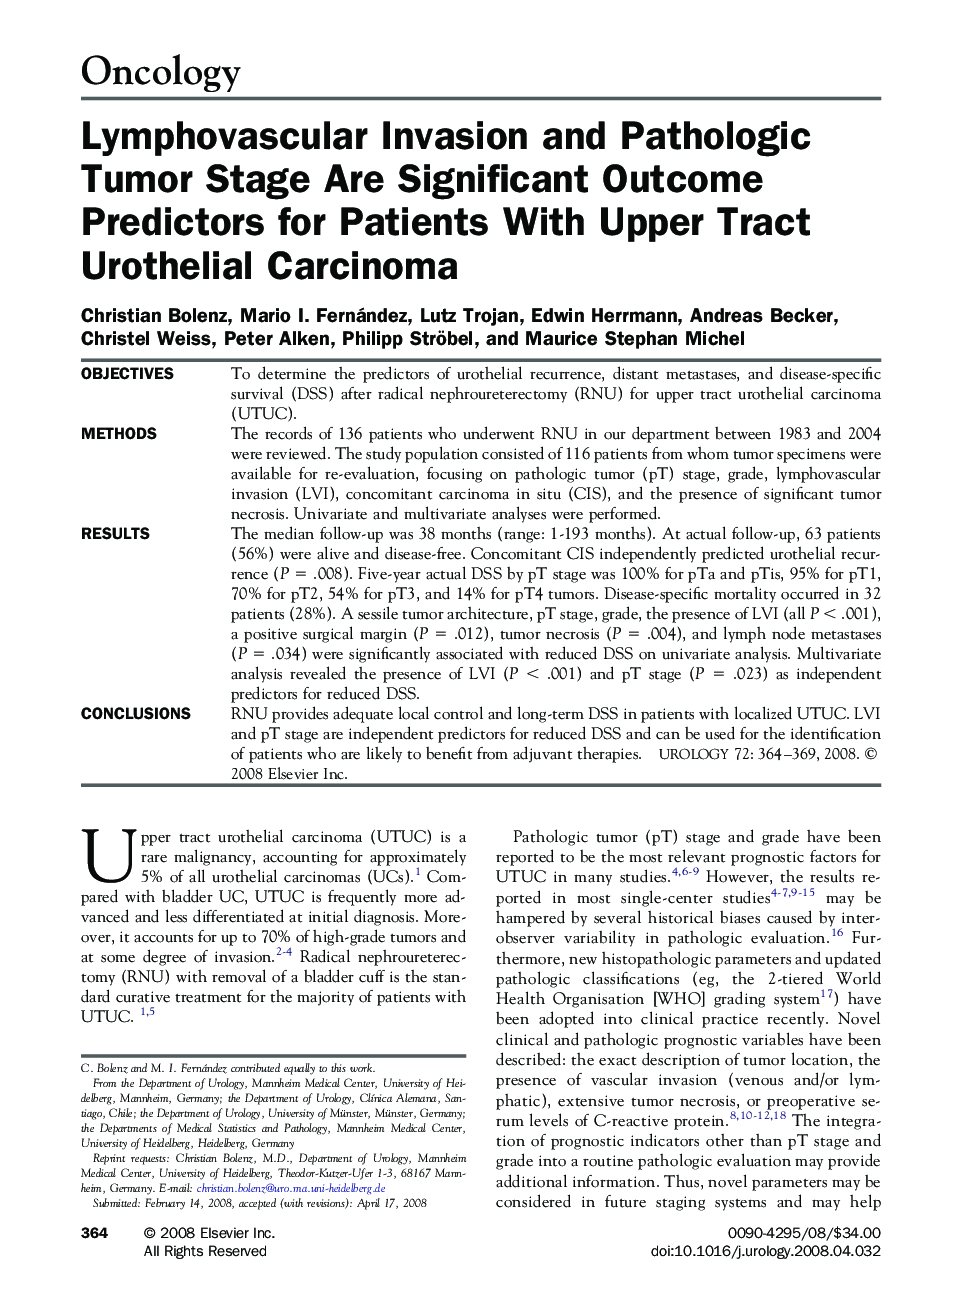 Lymphovascular Invasion and Pathologic Tumor Stage Are Significant Outcome Predictors for Patients With Upper Tract Urothelial Carcinoma 